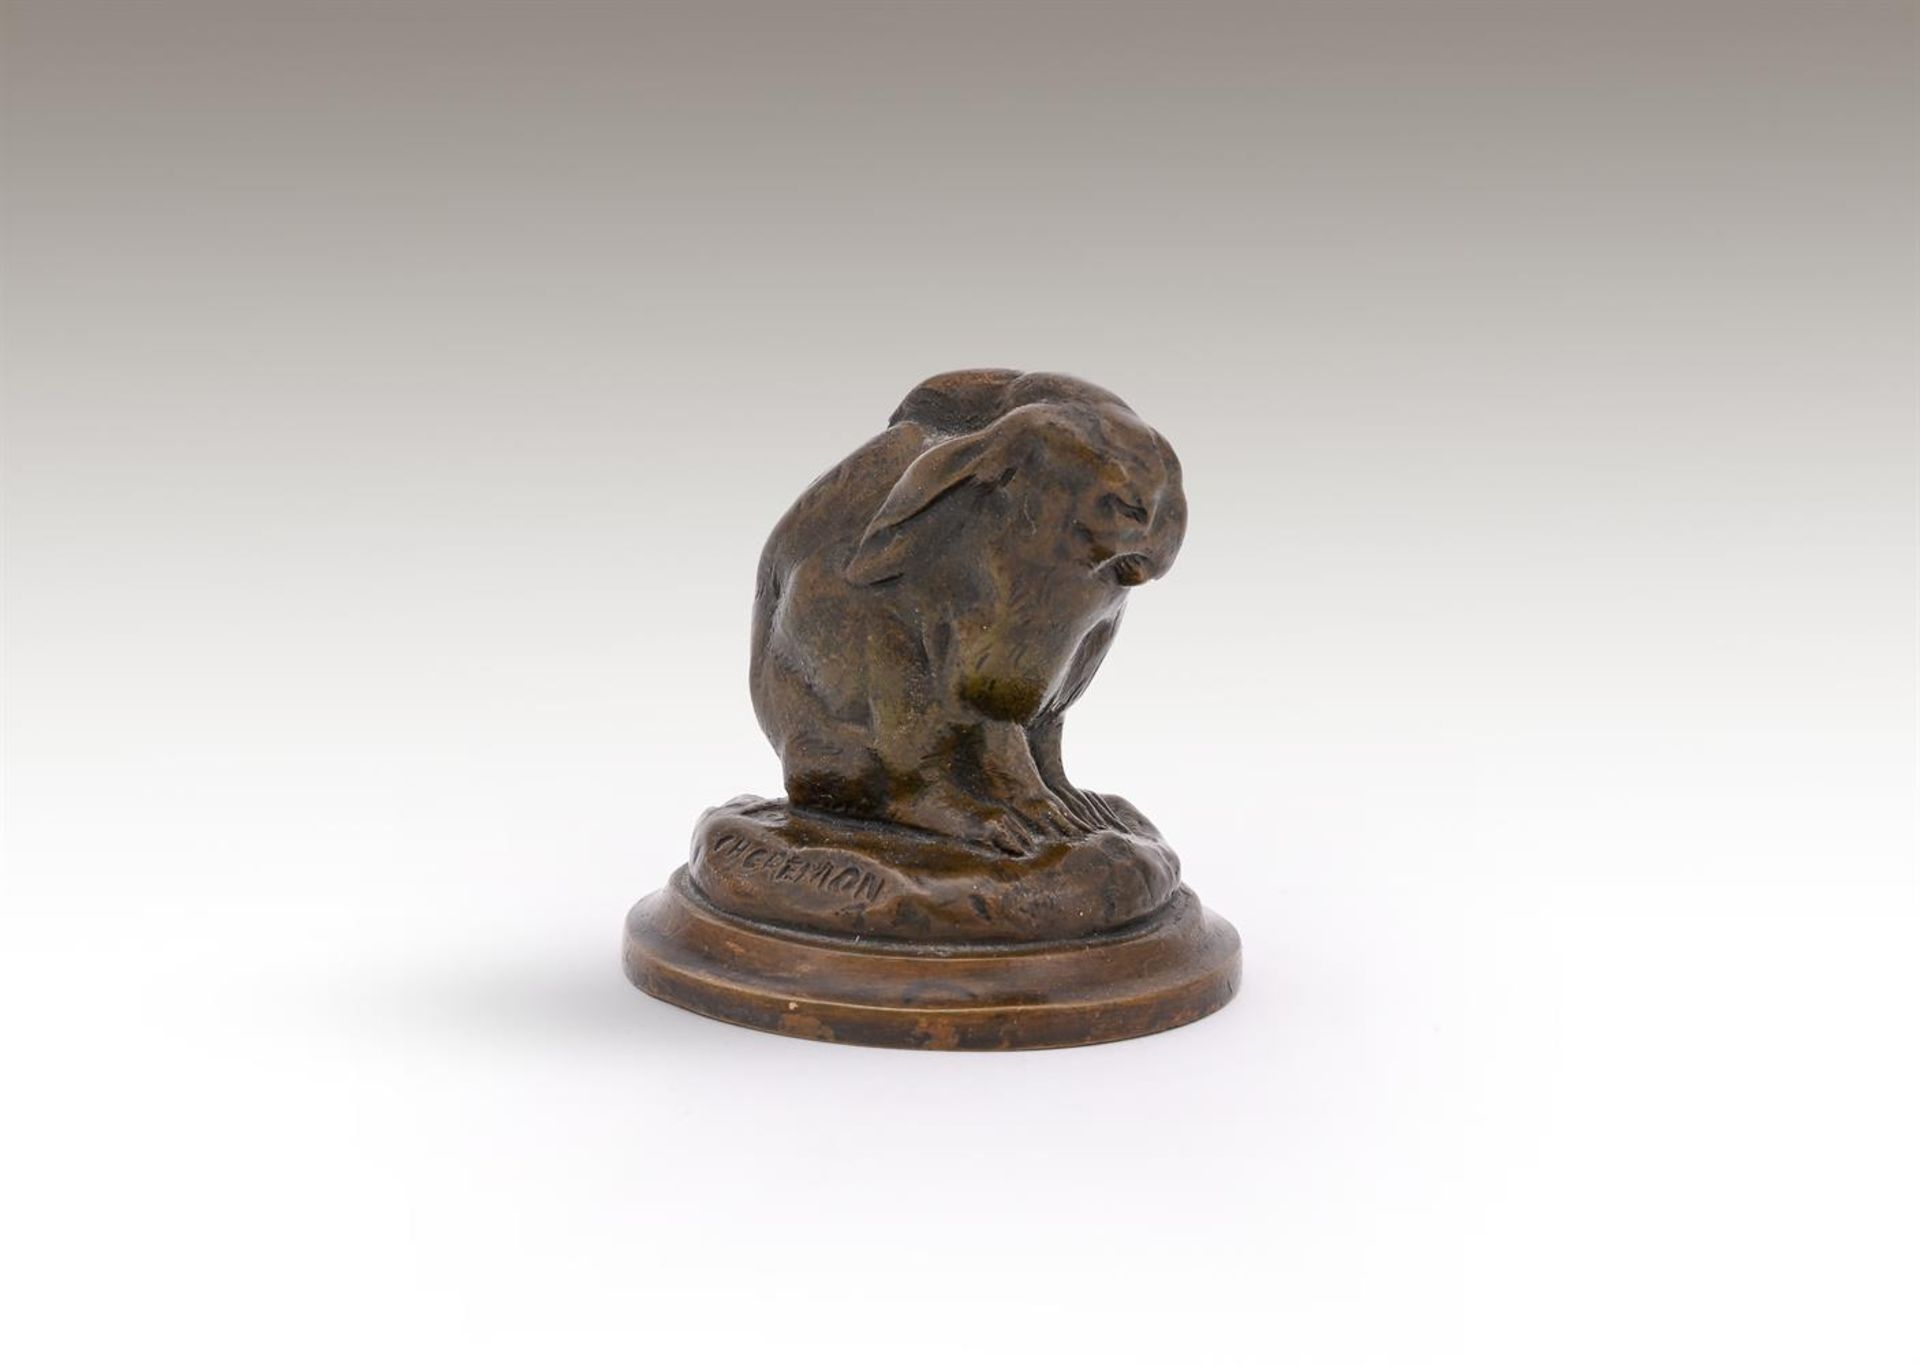 CHARLES GREMION (FRENCH, 19TH/20TH CENTURY), A BRONZE MODEL OF A RABBIT GROOMING - Image 4 of 4